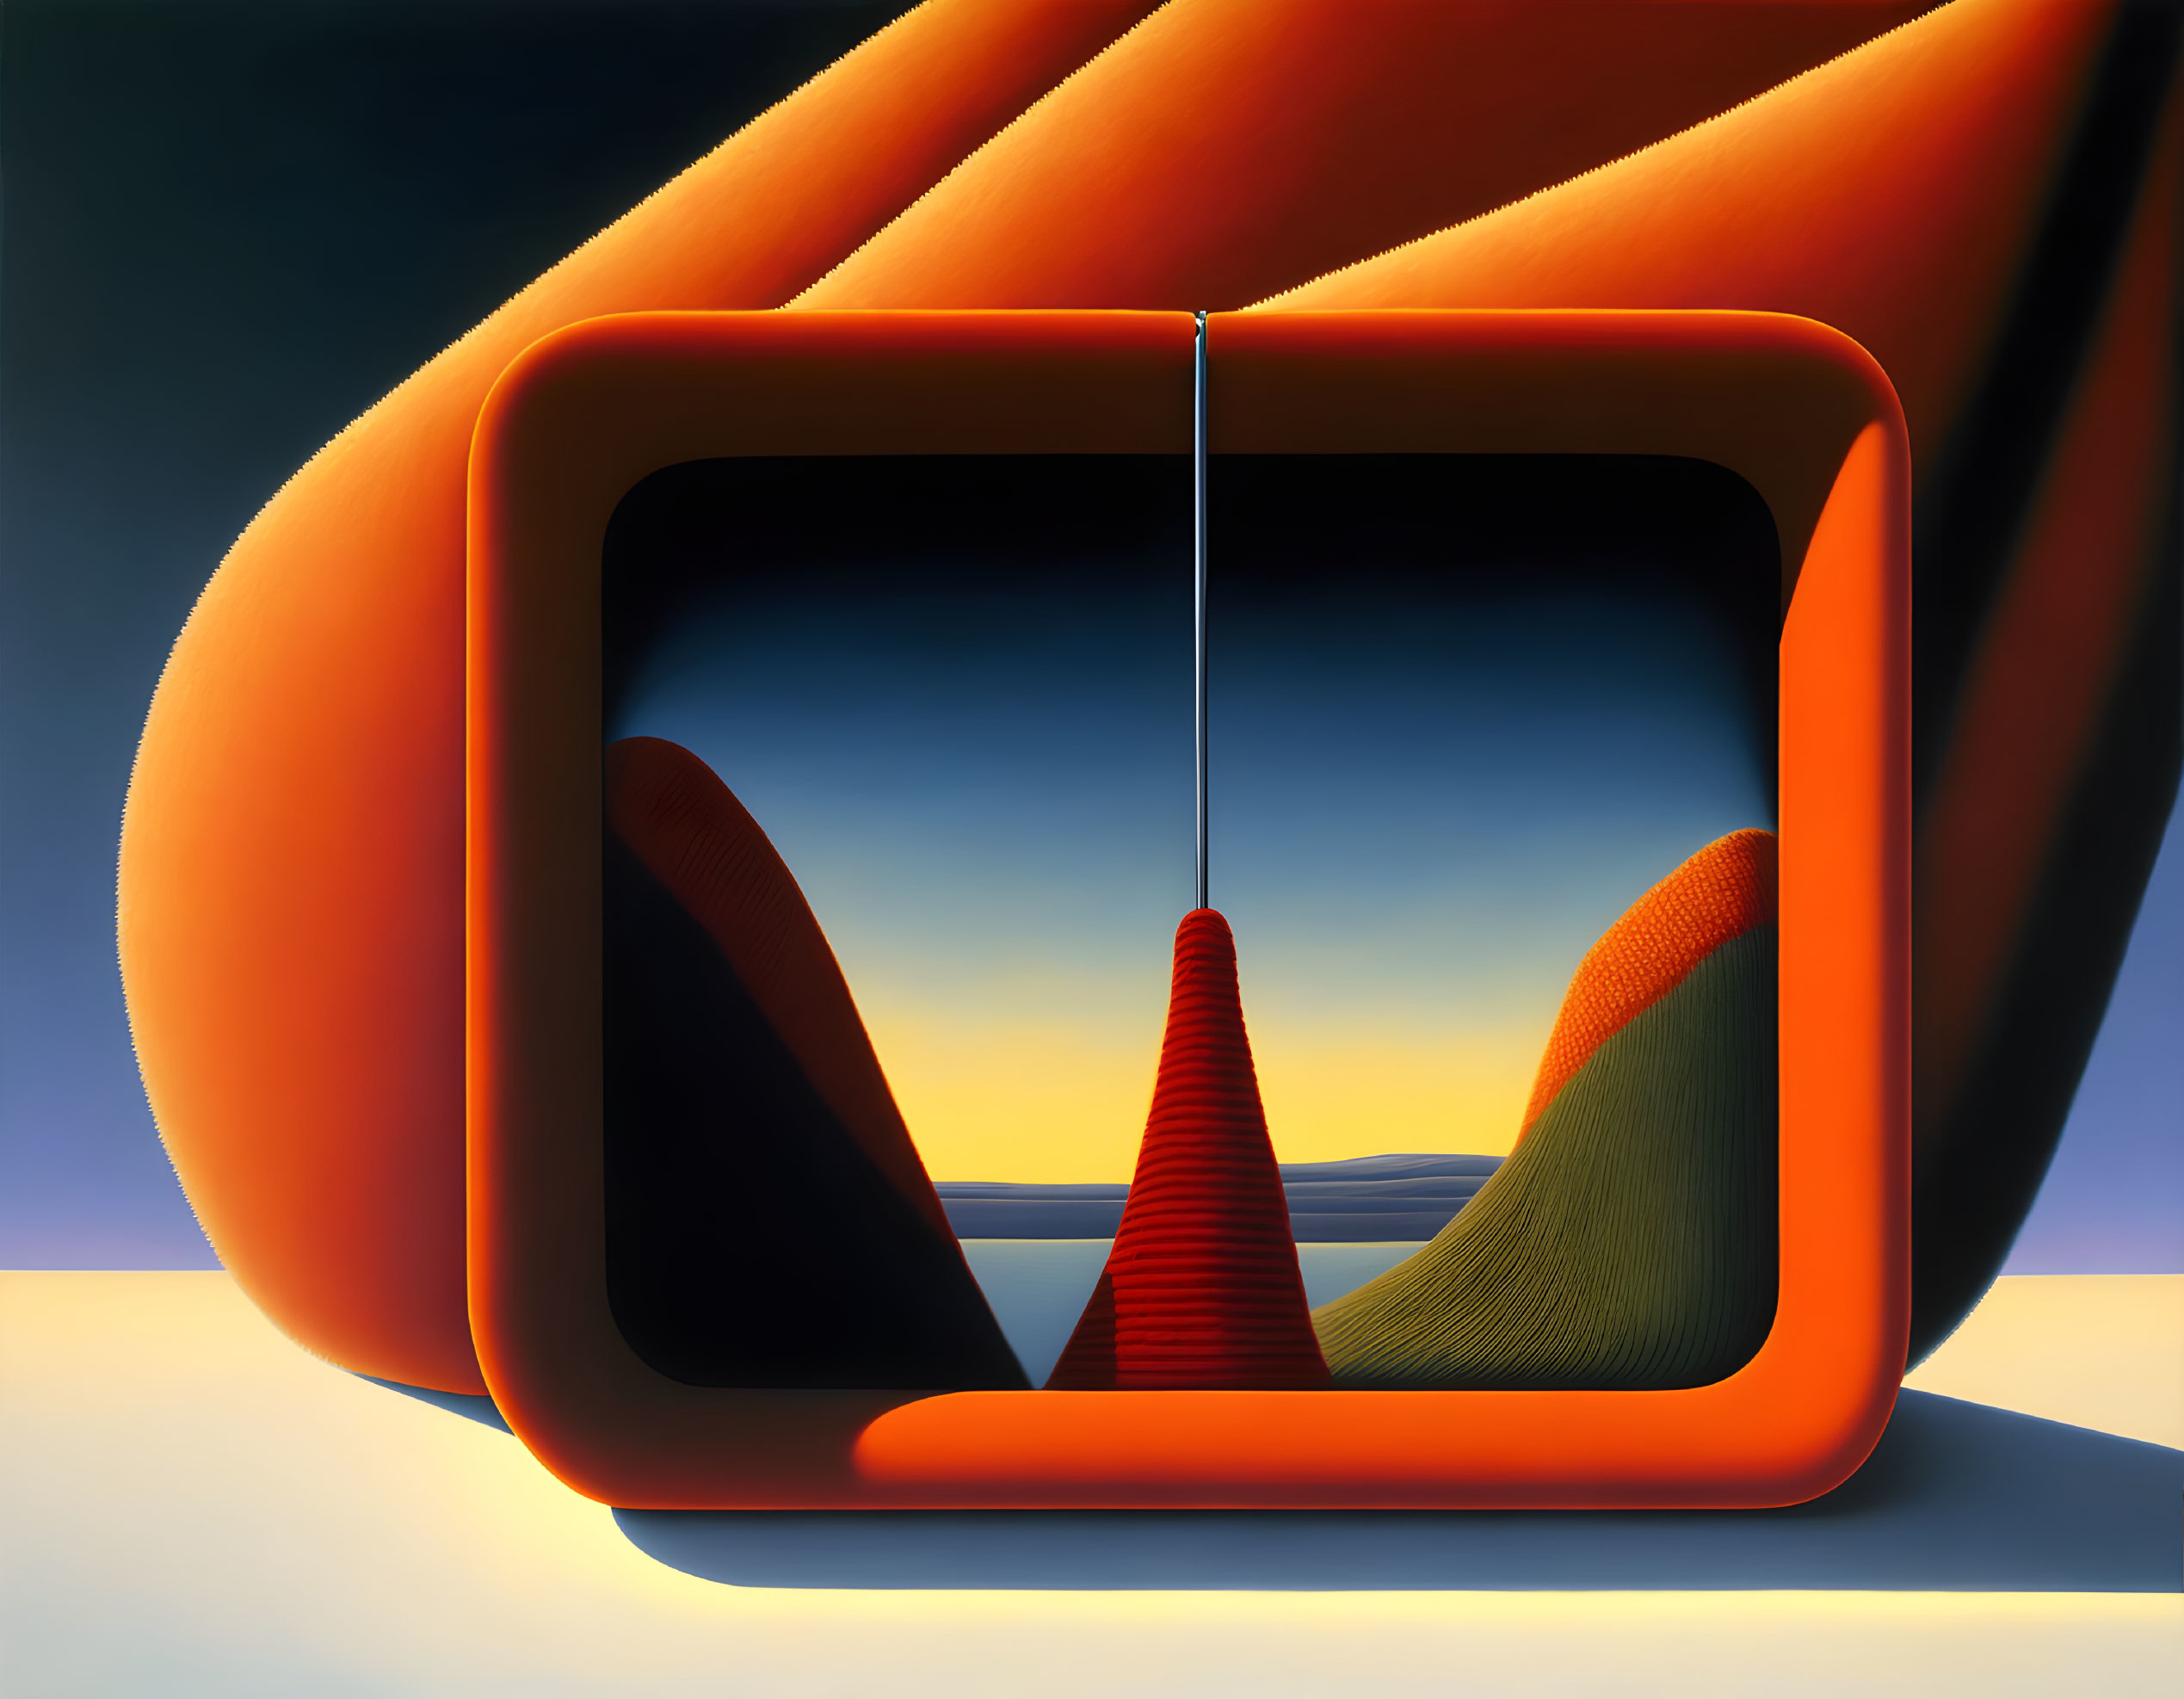 Surreal landscape with orange frame, red conical structure, and rolling hills under gradient sky